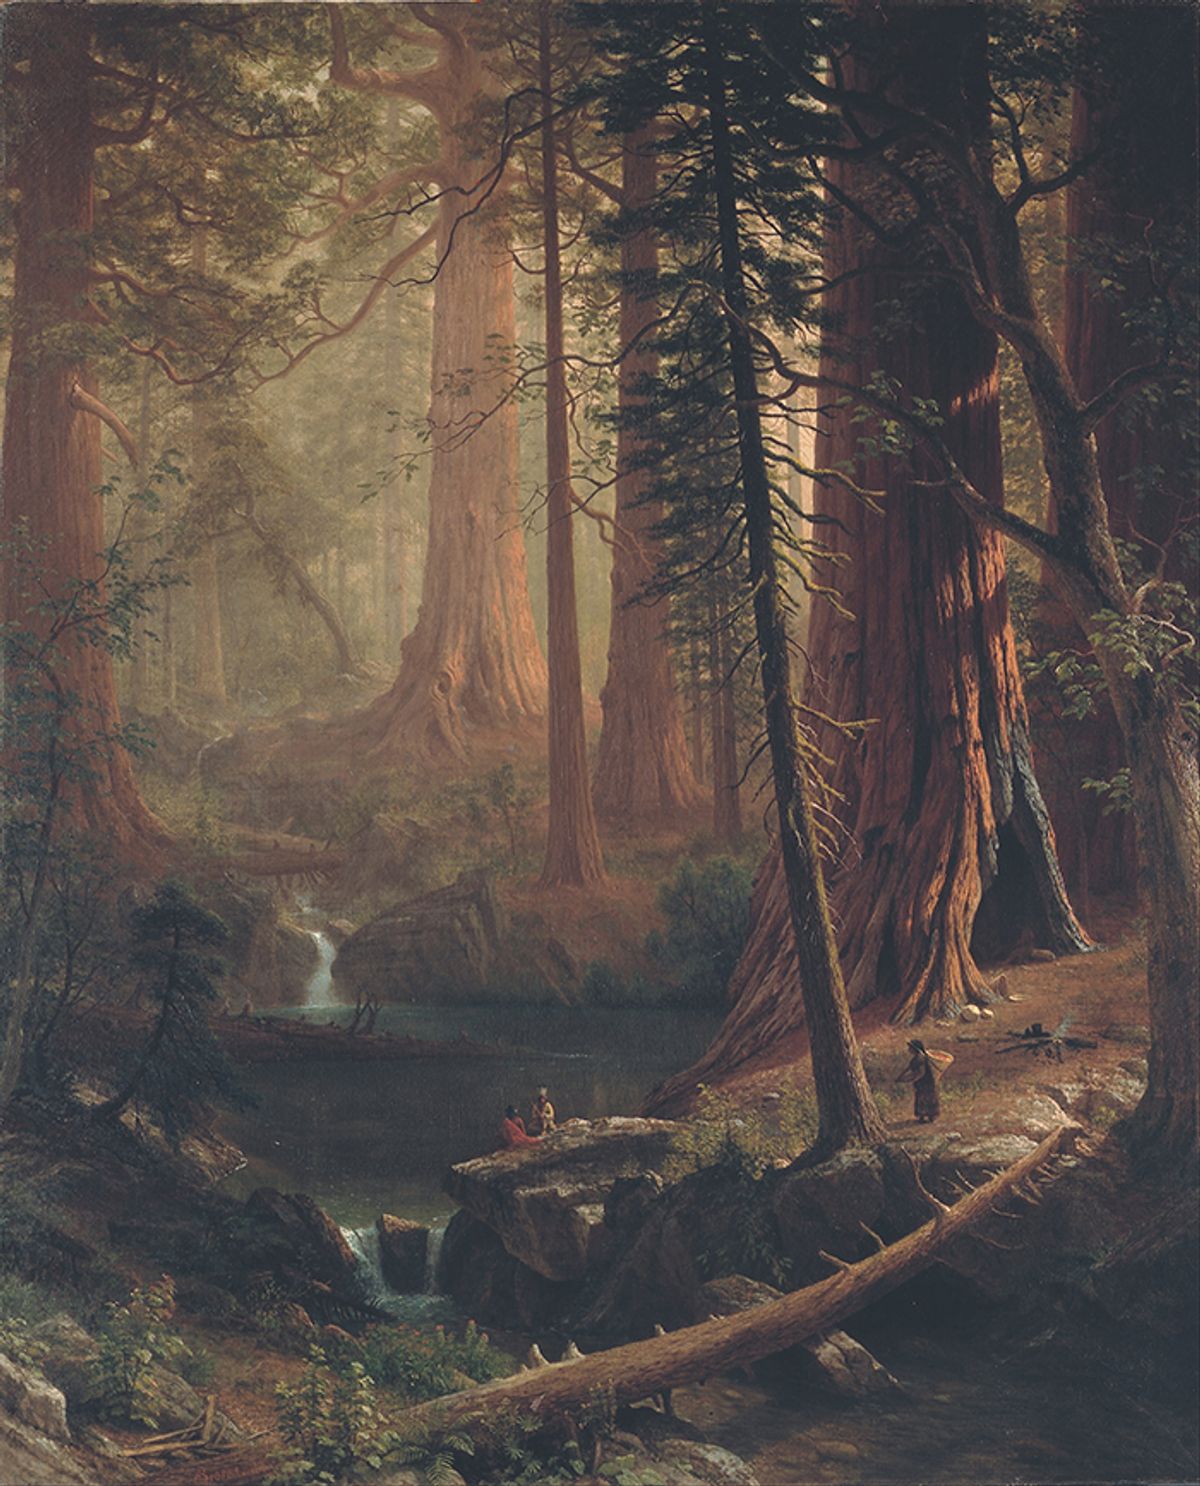 Giant Redwood Trees of California (1874) by Albert Bierstadt is one of the nine works The Berkshire Museum will sell off in the coming months Wikimedia Commons